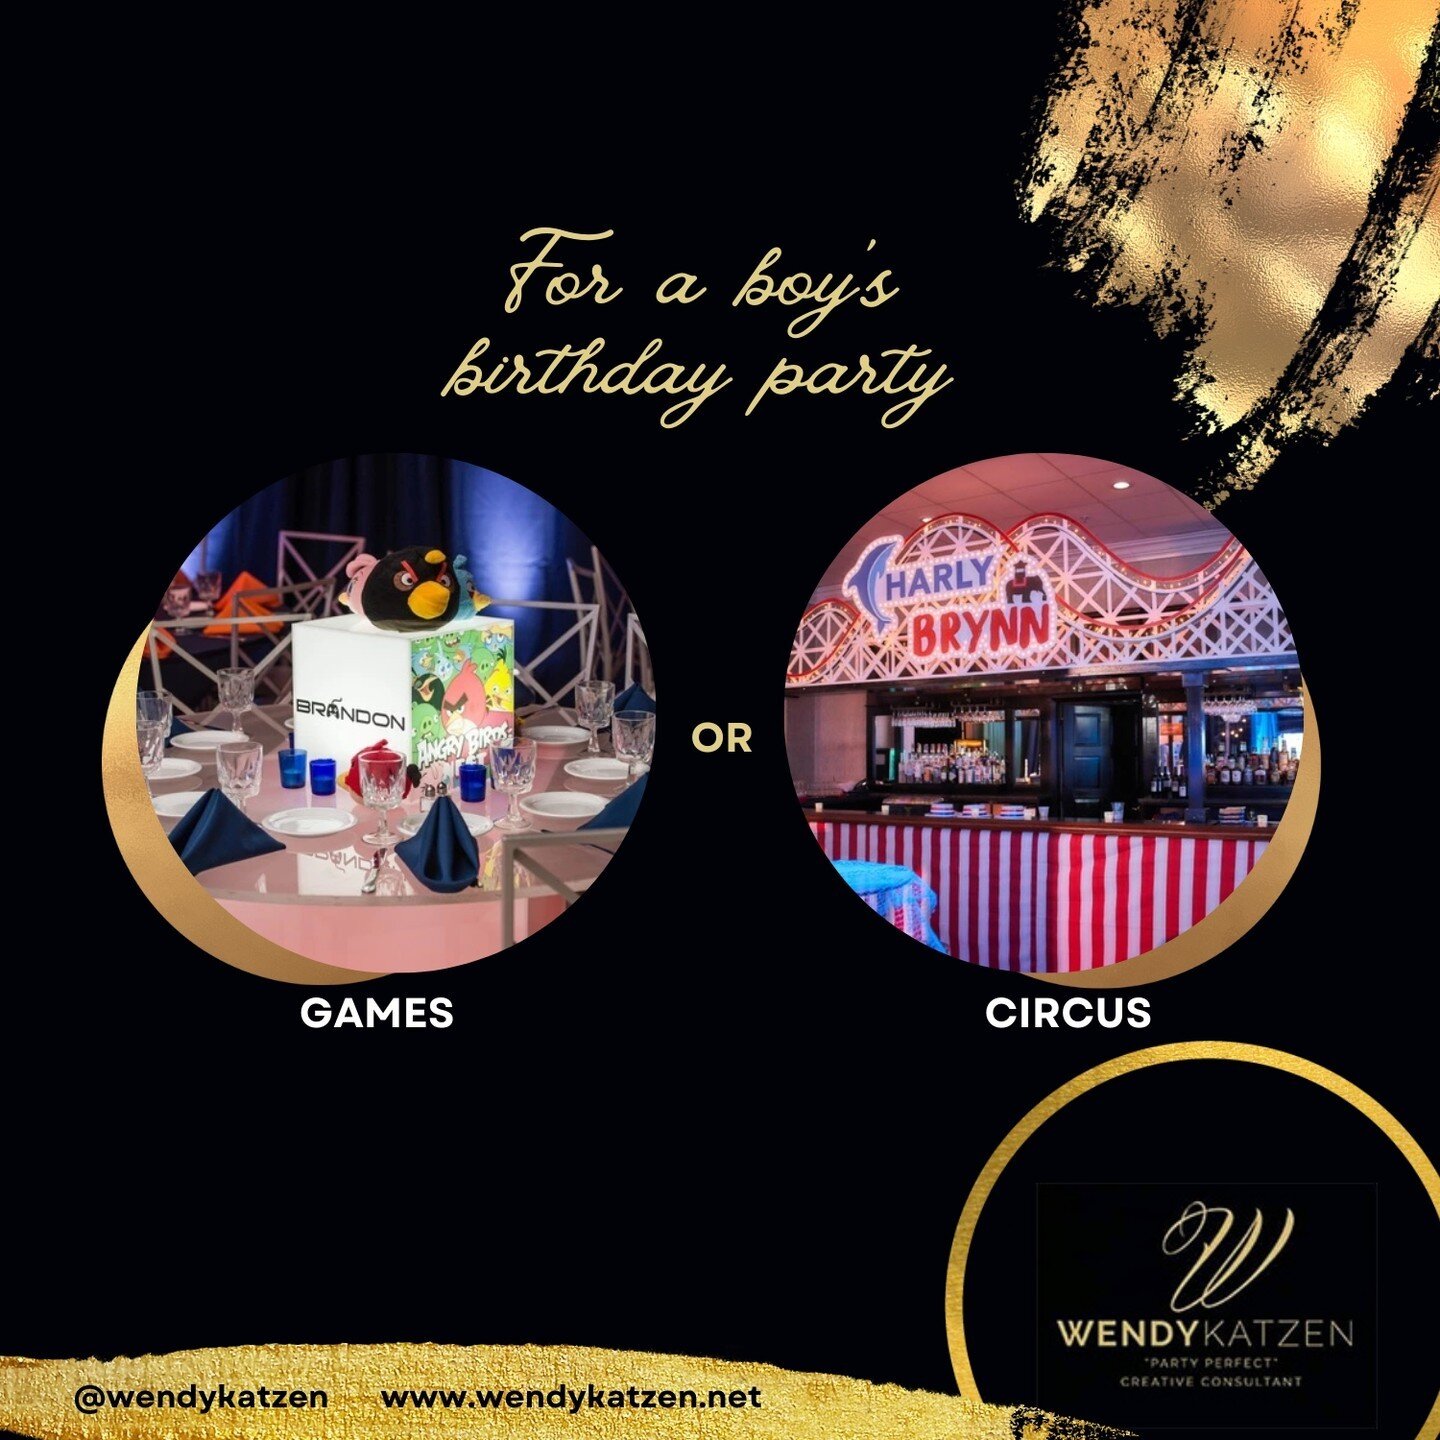 When you want an exciting option for your kid's birthday, leave it up to us! 

Choose from a variety of themes like gaming, circus, animals and so many more!

Visit www.wendykatzen.net or call us via 301-404-9499 today!

#wendykatzen #weddingsmd #eve